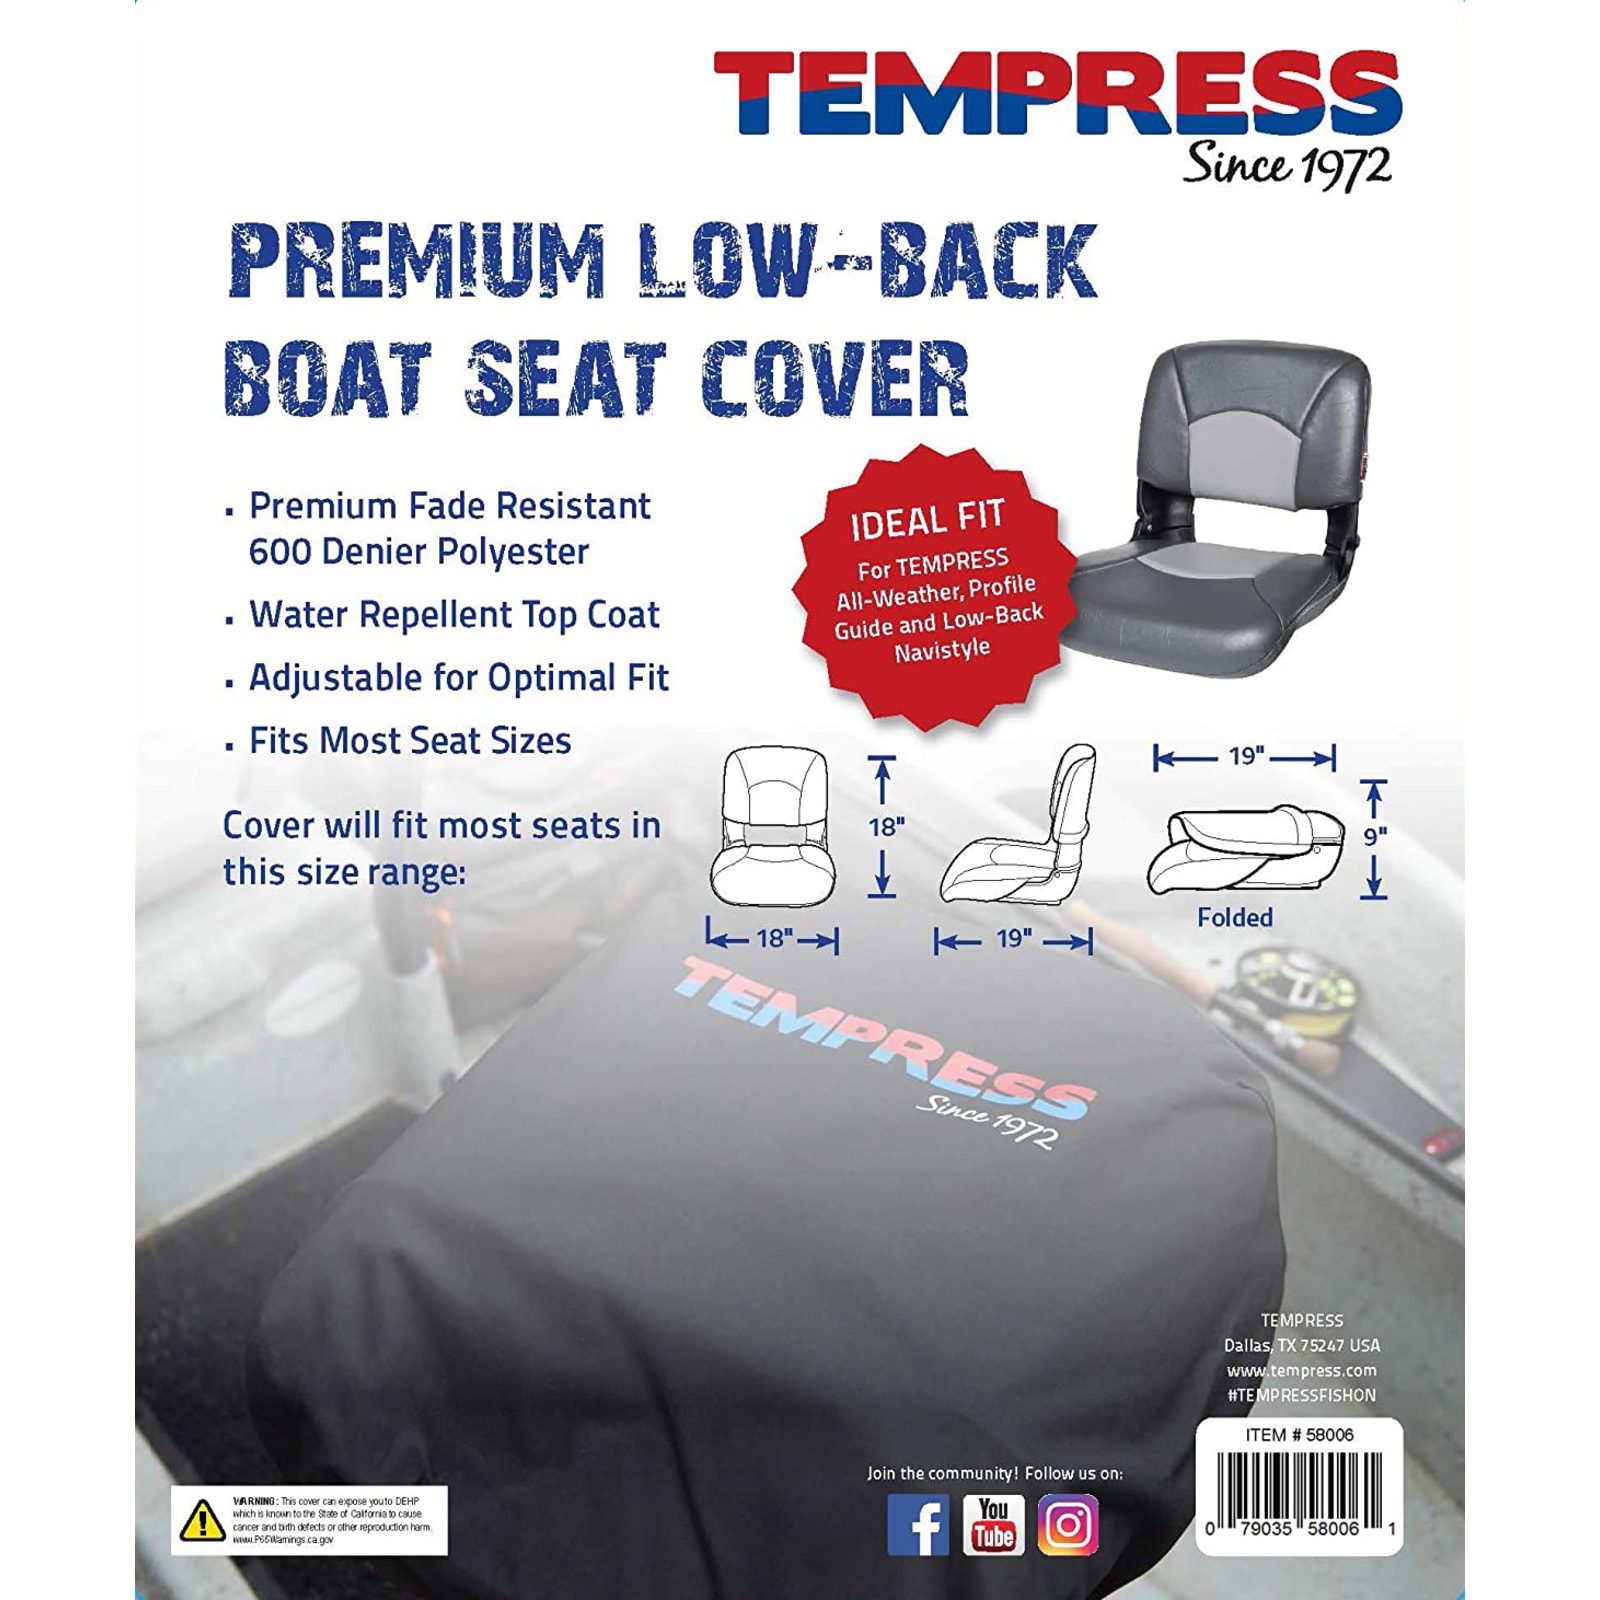 18 in x 18 in x 19 in Black Premium Low-Back Boat Seat Cover by